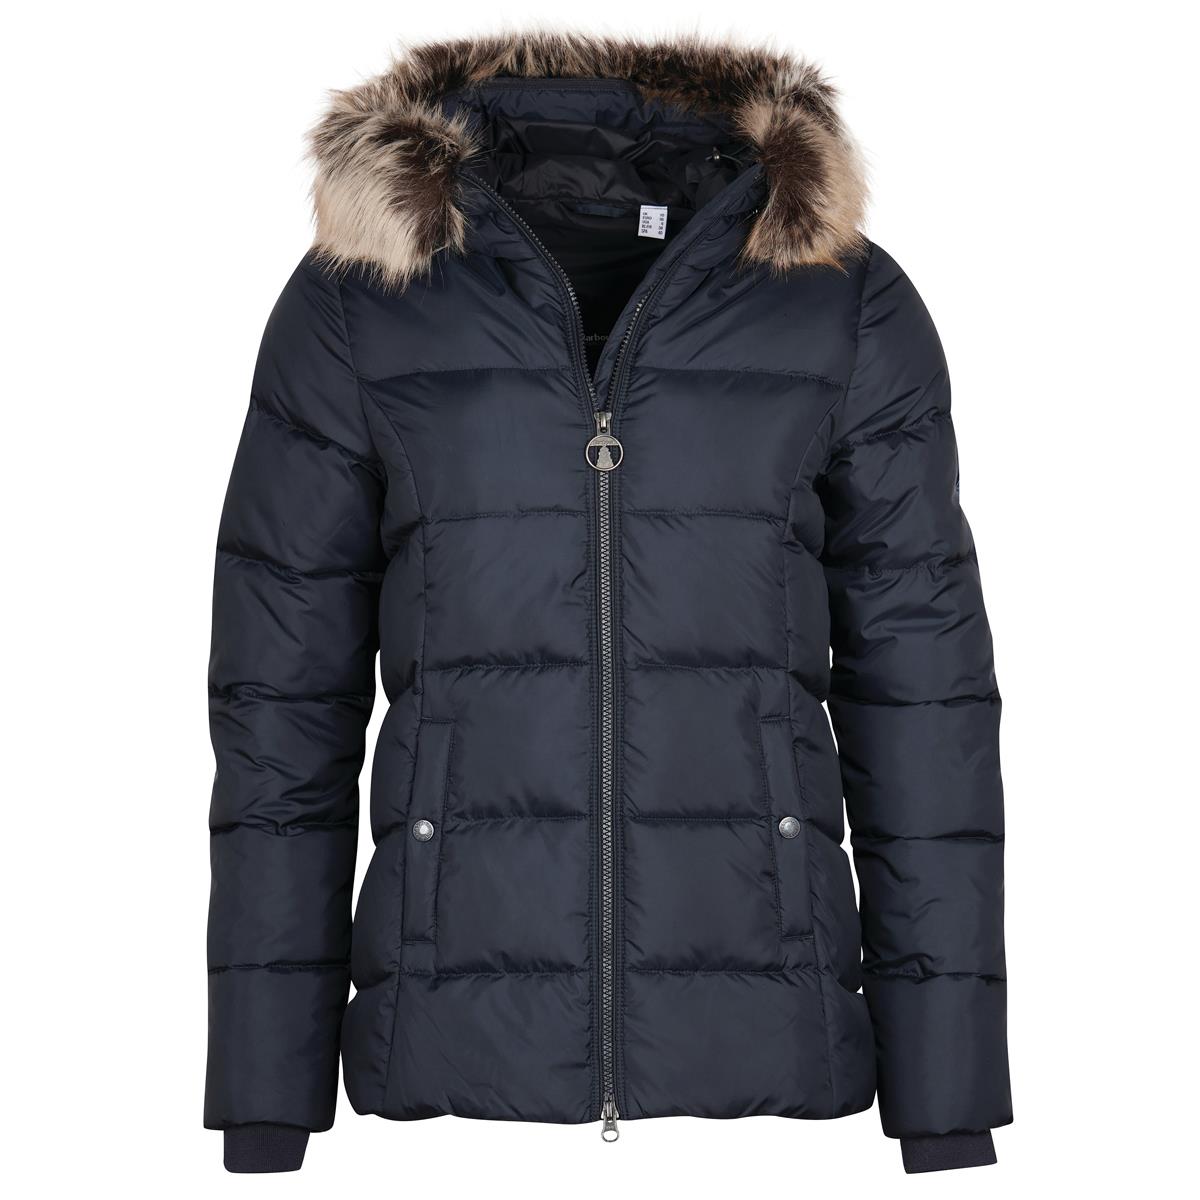 Can you detach the fur from the Barbour Midhurst Quilted Jacket hood?